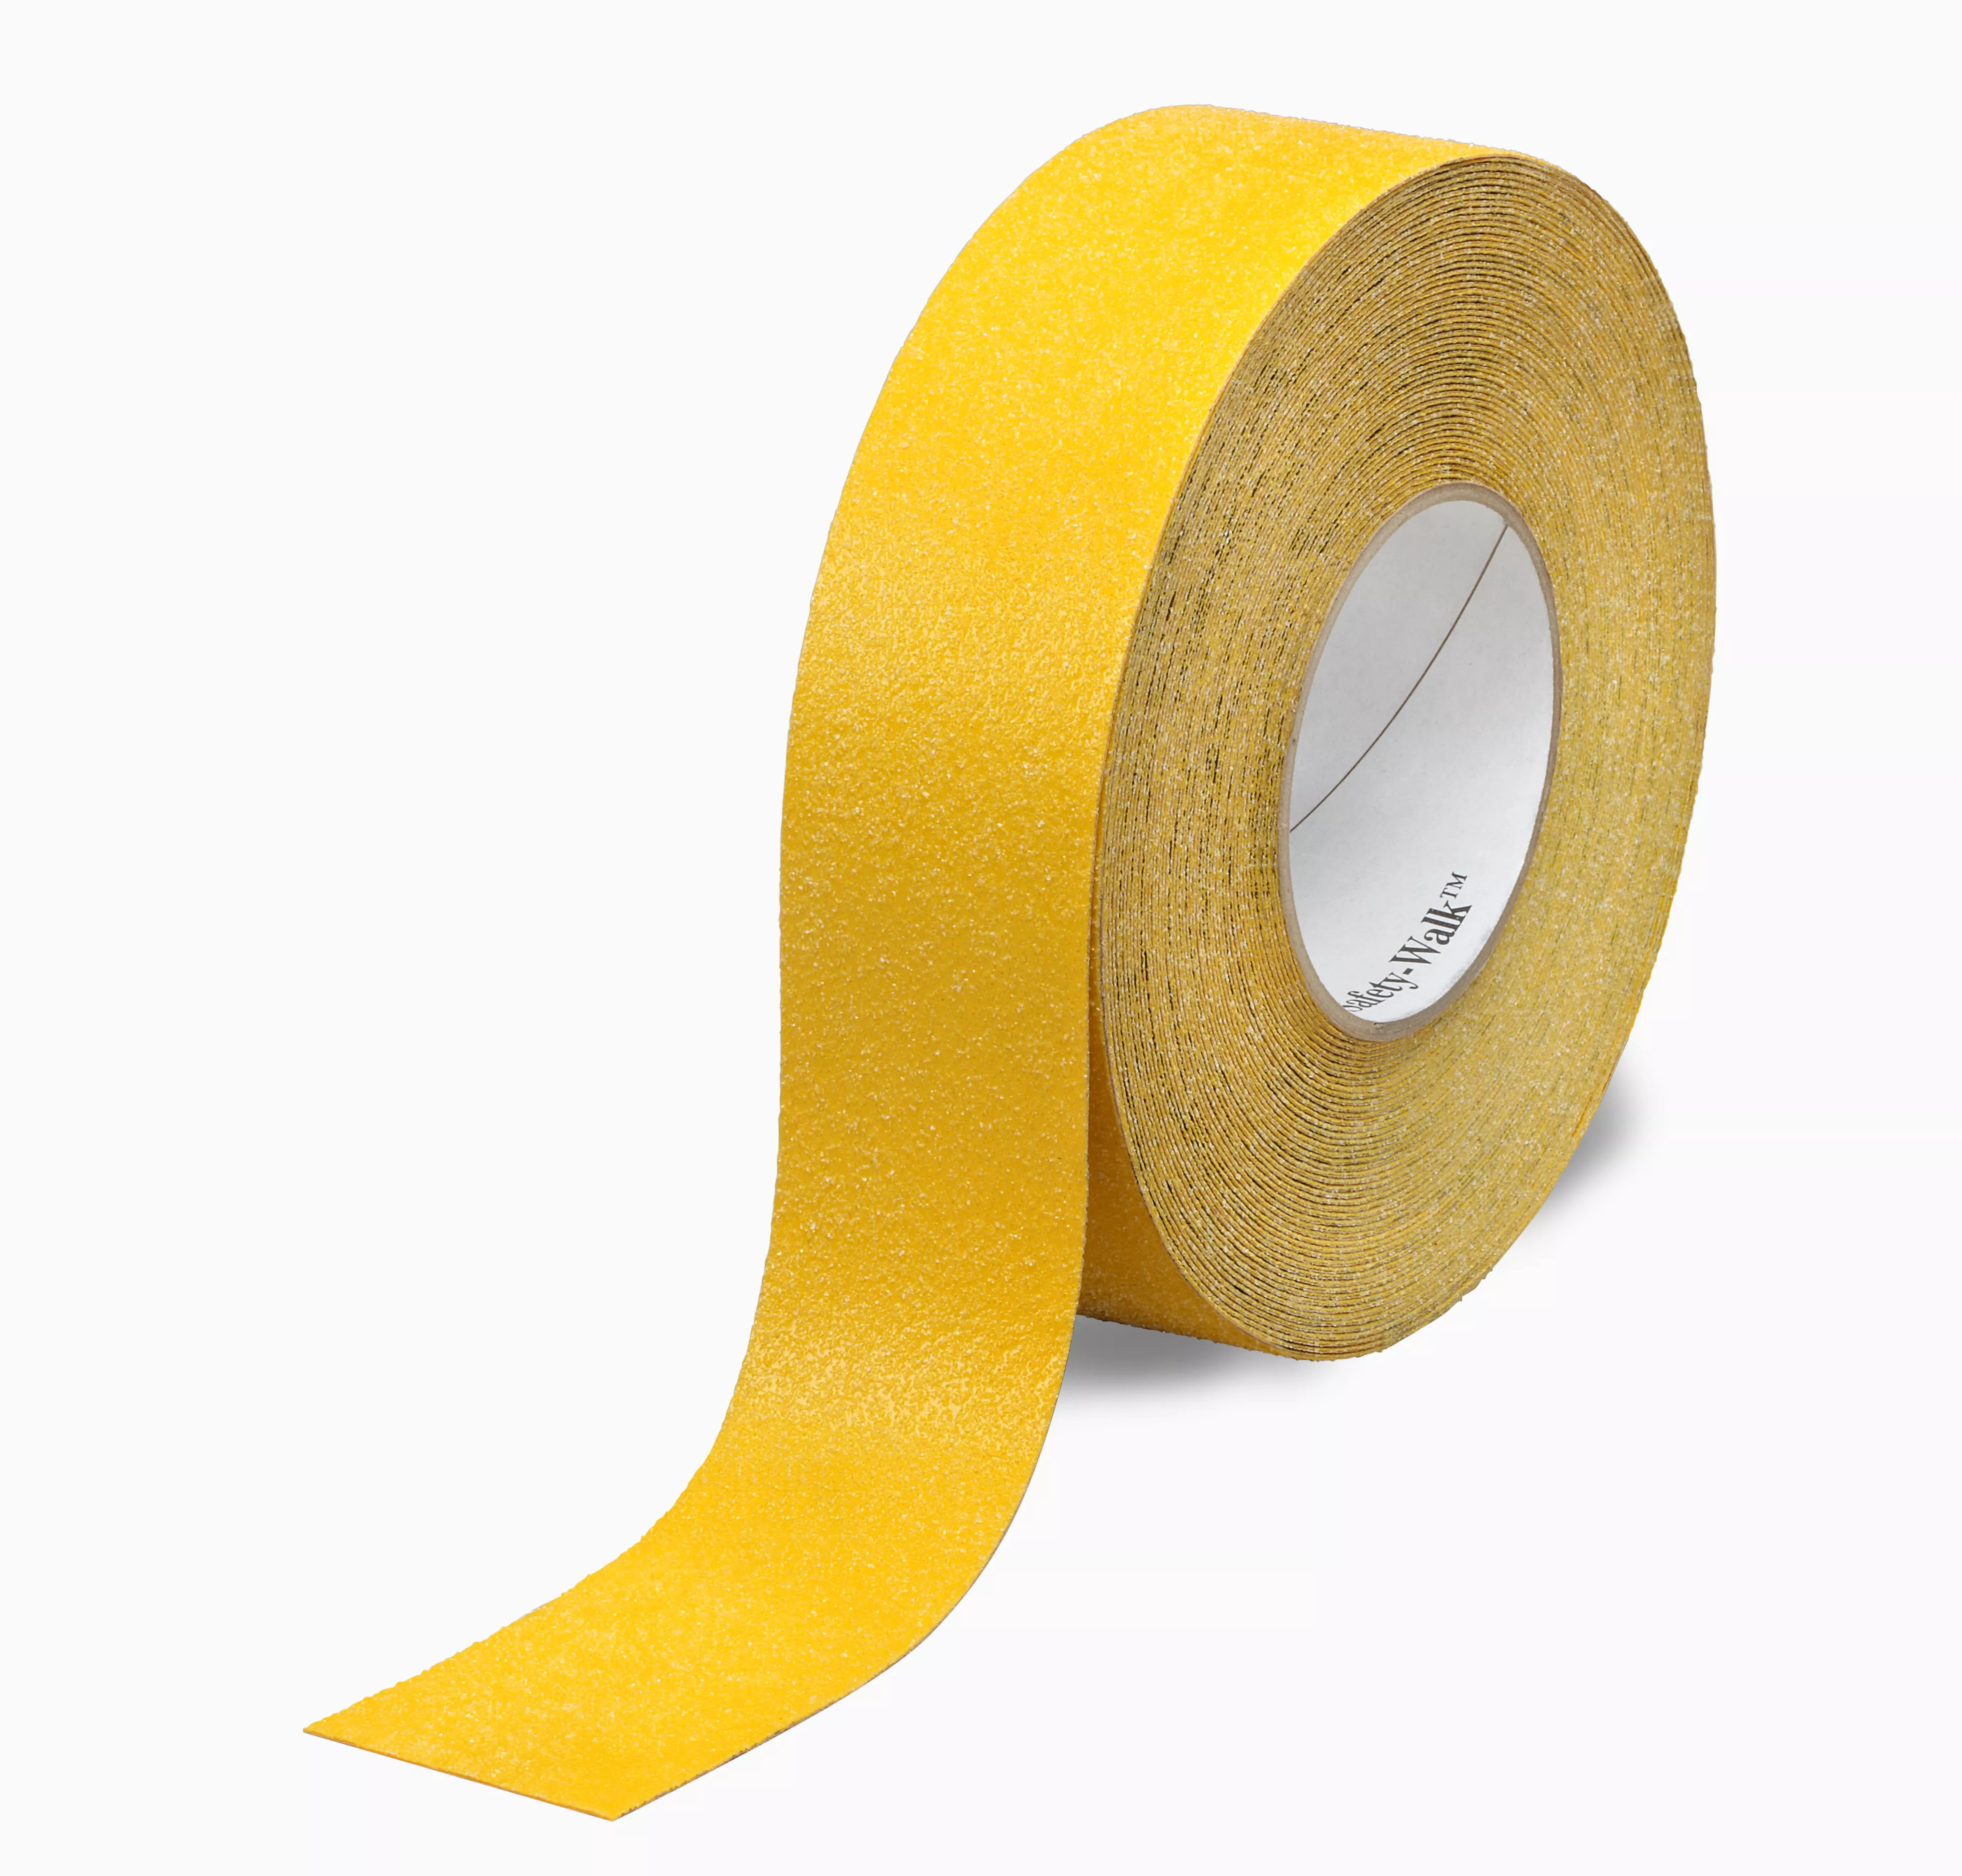 Product Number 630-B | 3M™ Safety-Walk™ Slip-Resistant General Purpose Tapes & Treads 630-B